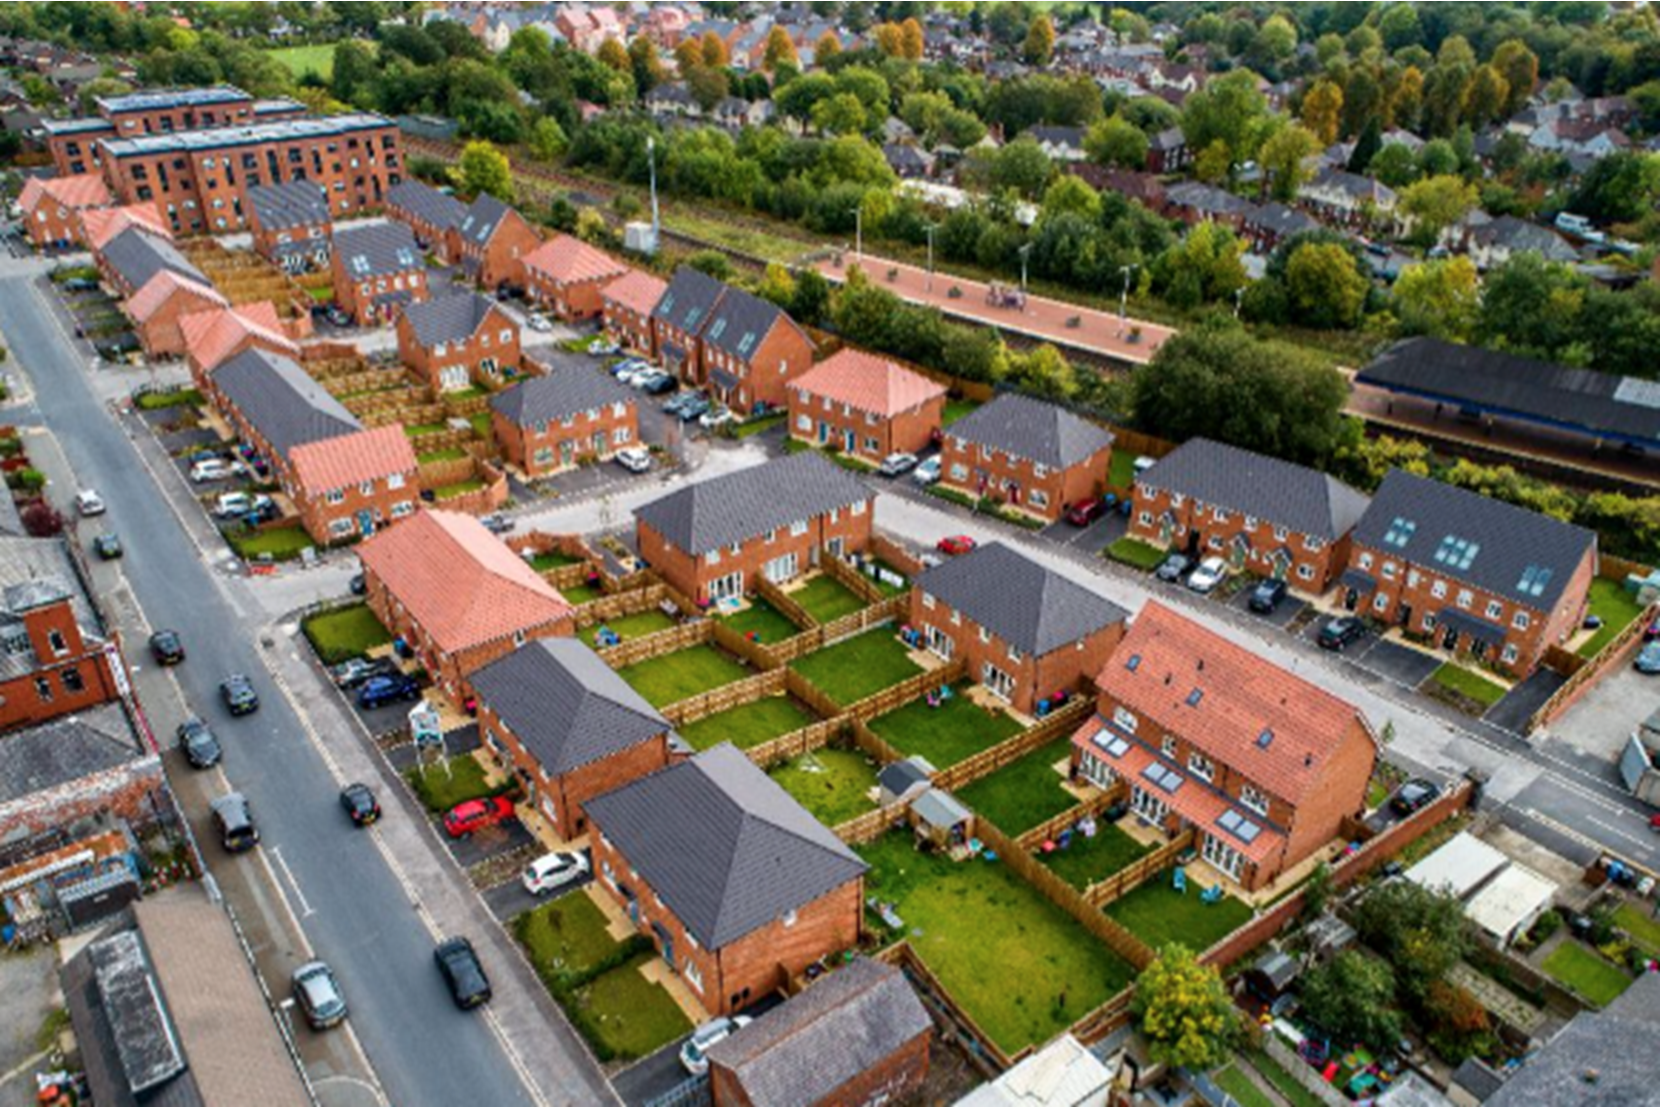 Houses and Apartments to Rent by Simple Life at Holyoake Road, Walkden, M28, aerial development panoramic